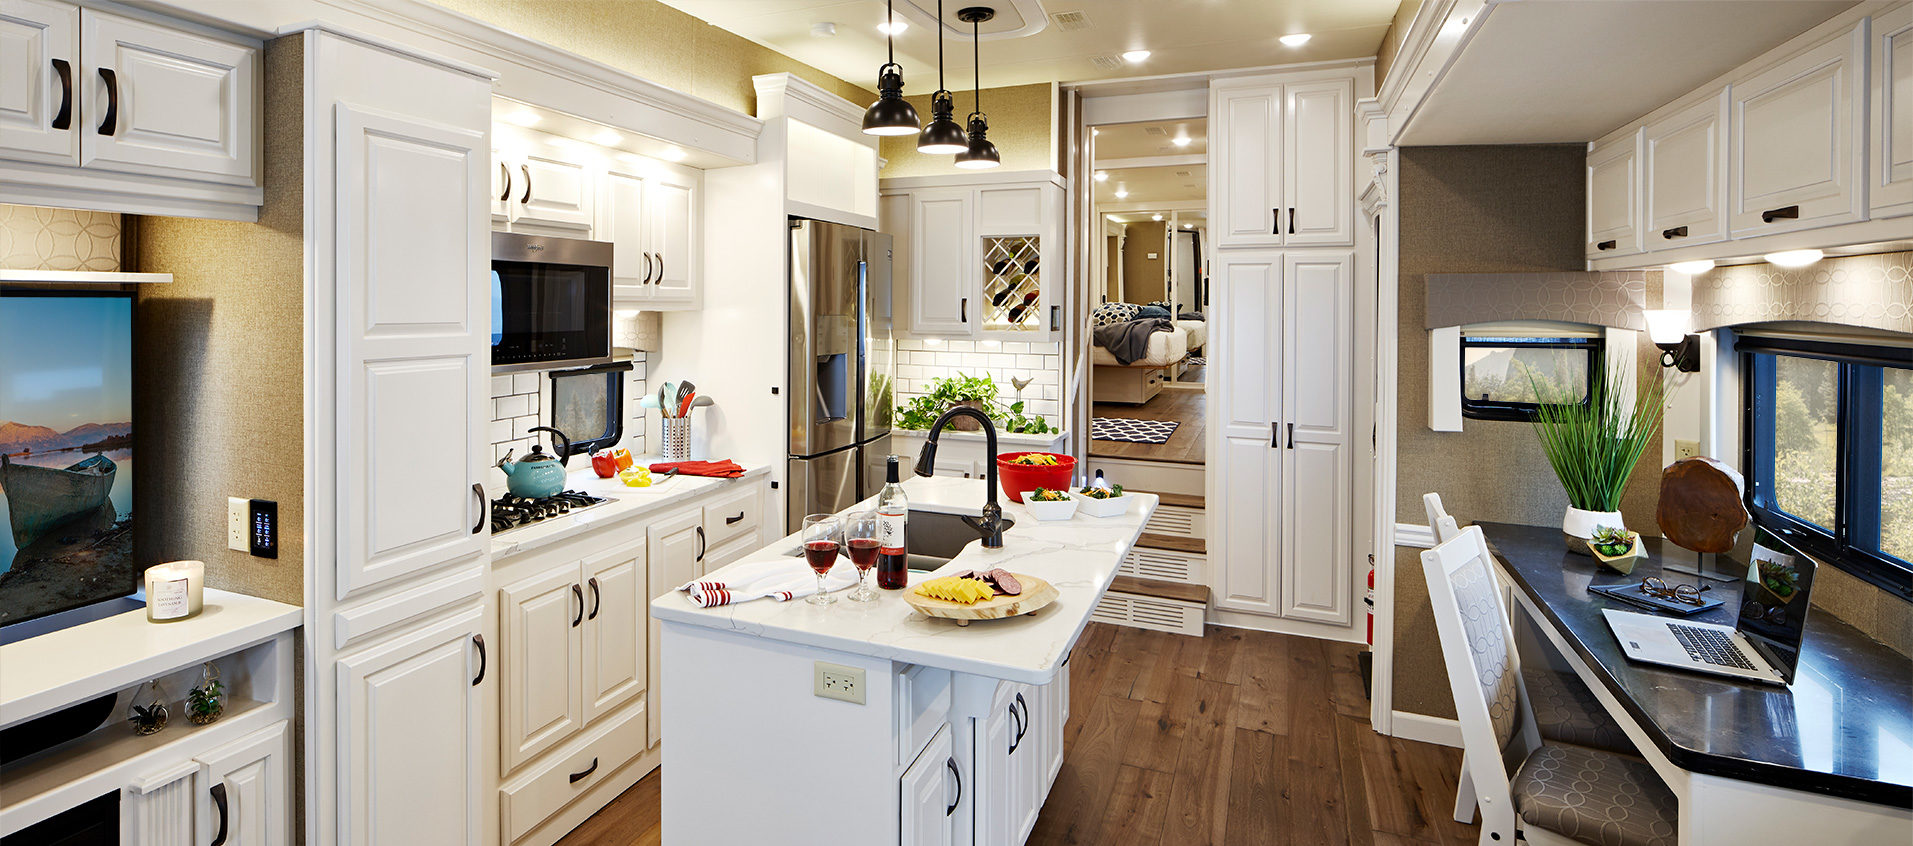 Located In The Center Of The Nation, Junction City’s New Horizons RV Is Positioned to Deliver On The RV Trend Main Photo